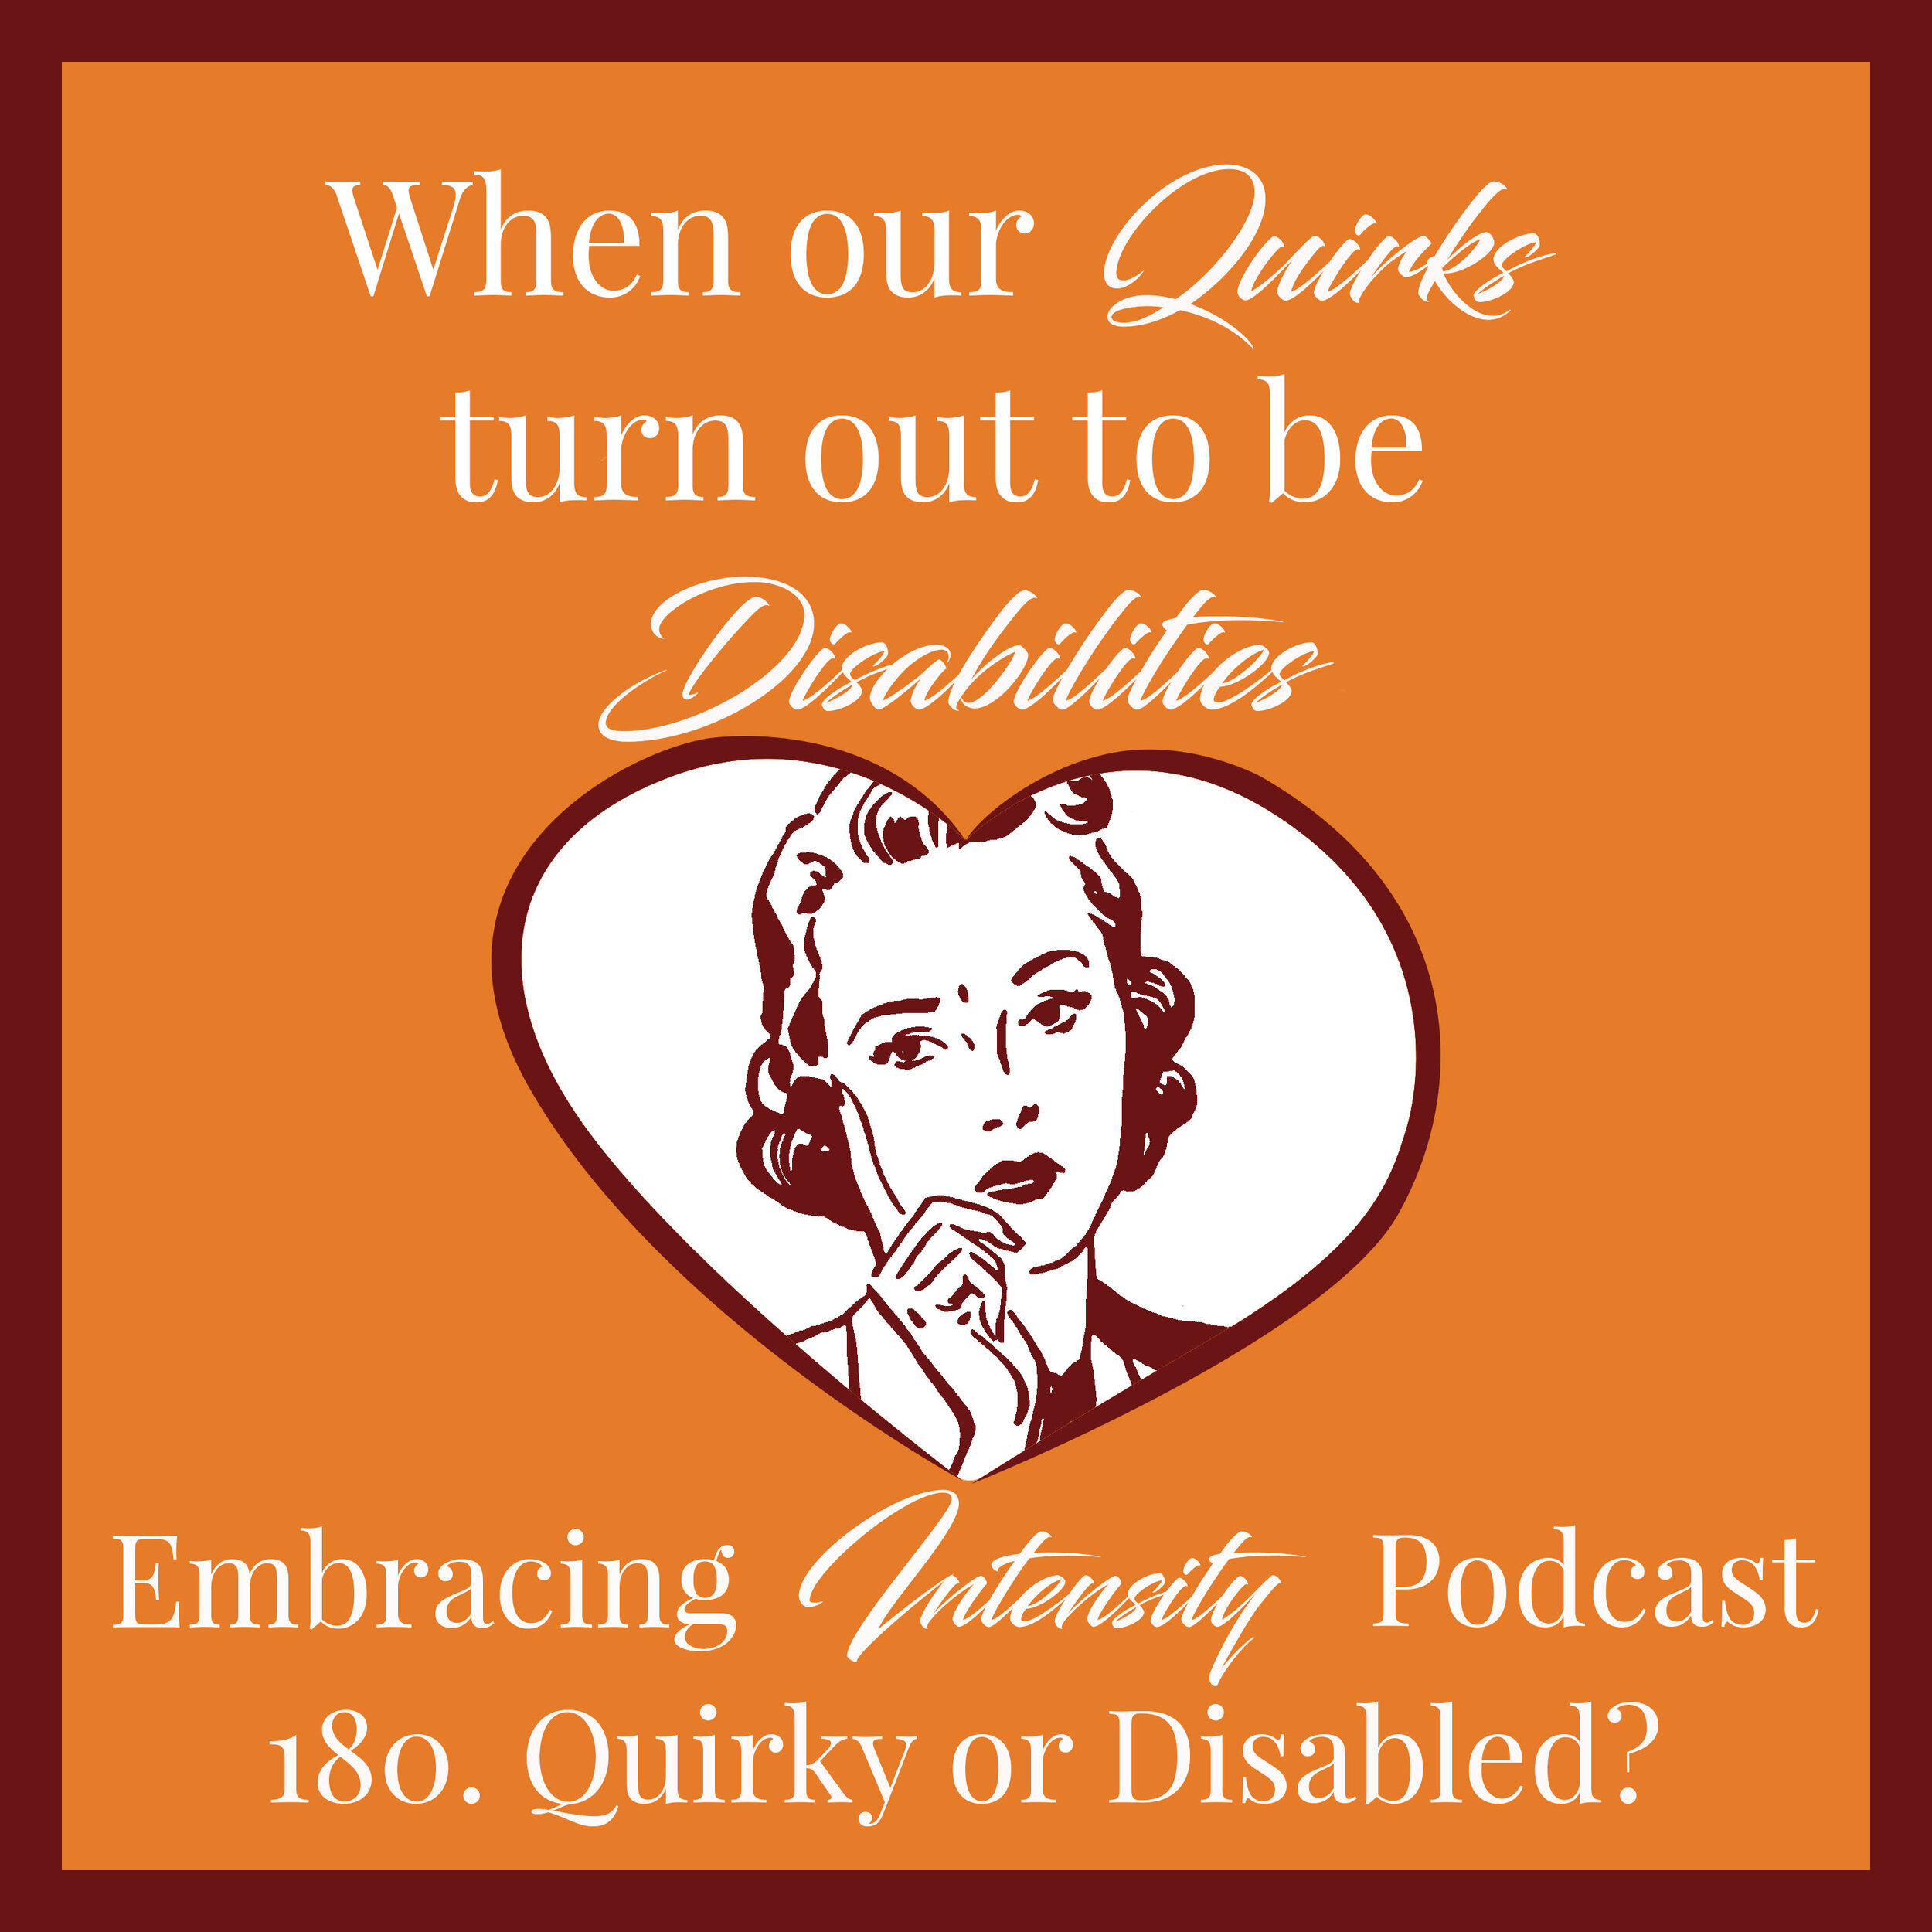 Quirky or Disabled?